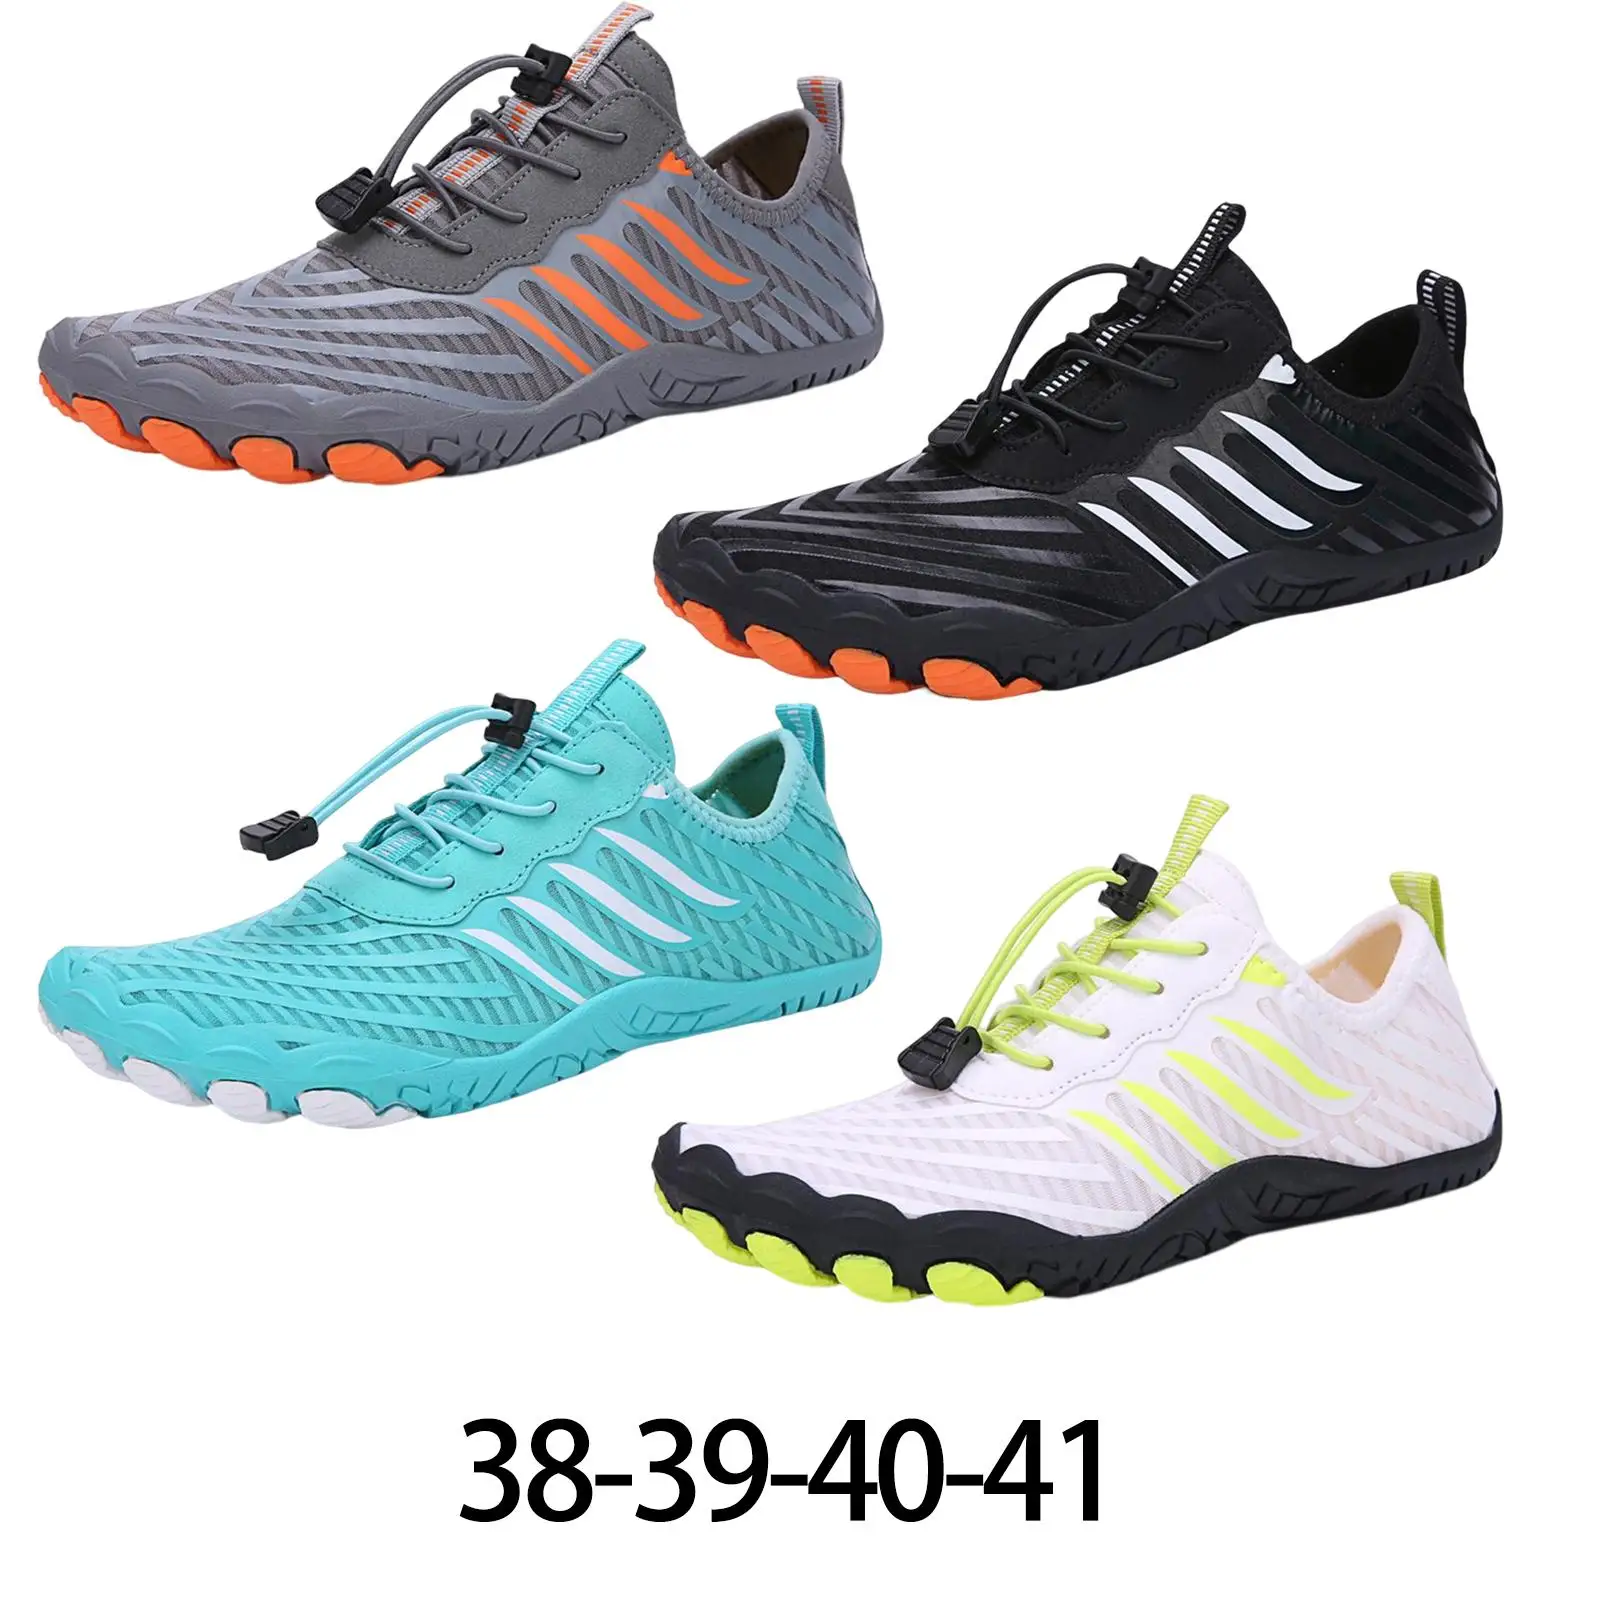 Breathable Men Water Shoes Sneakers Barefoot for Beach, Sailing, Surfing,